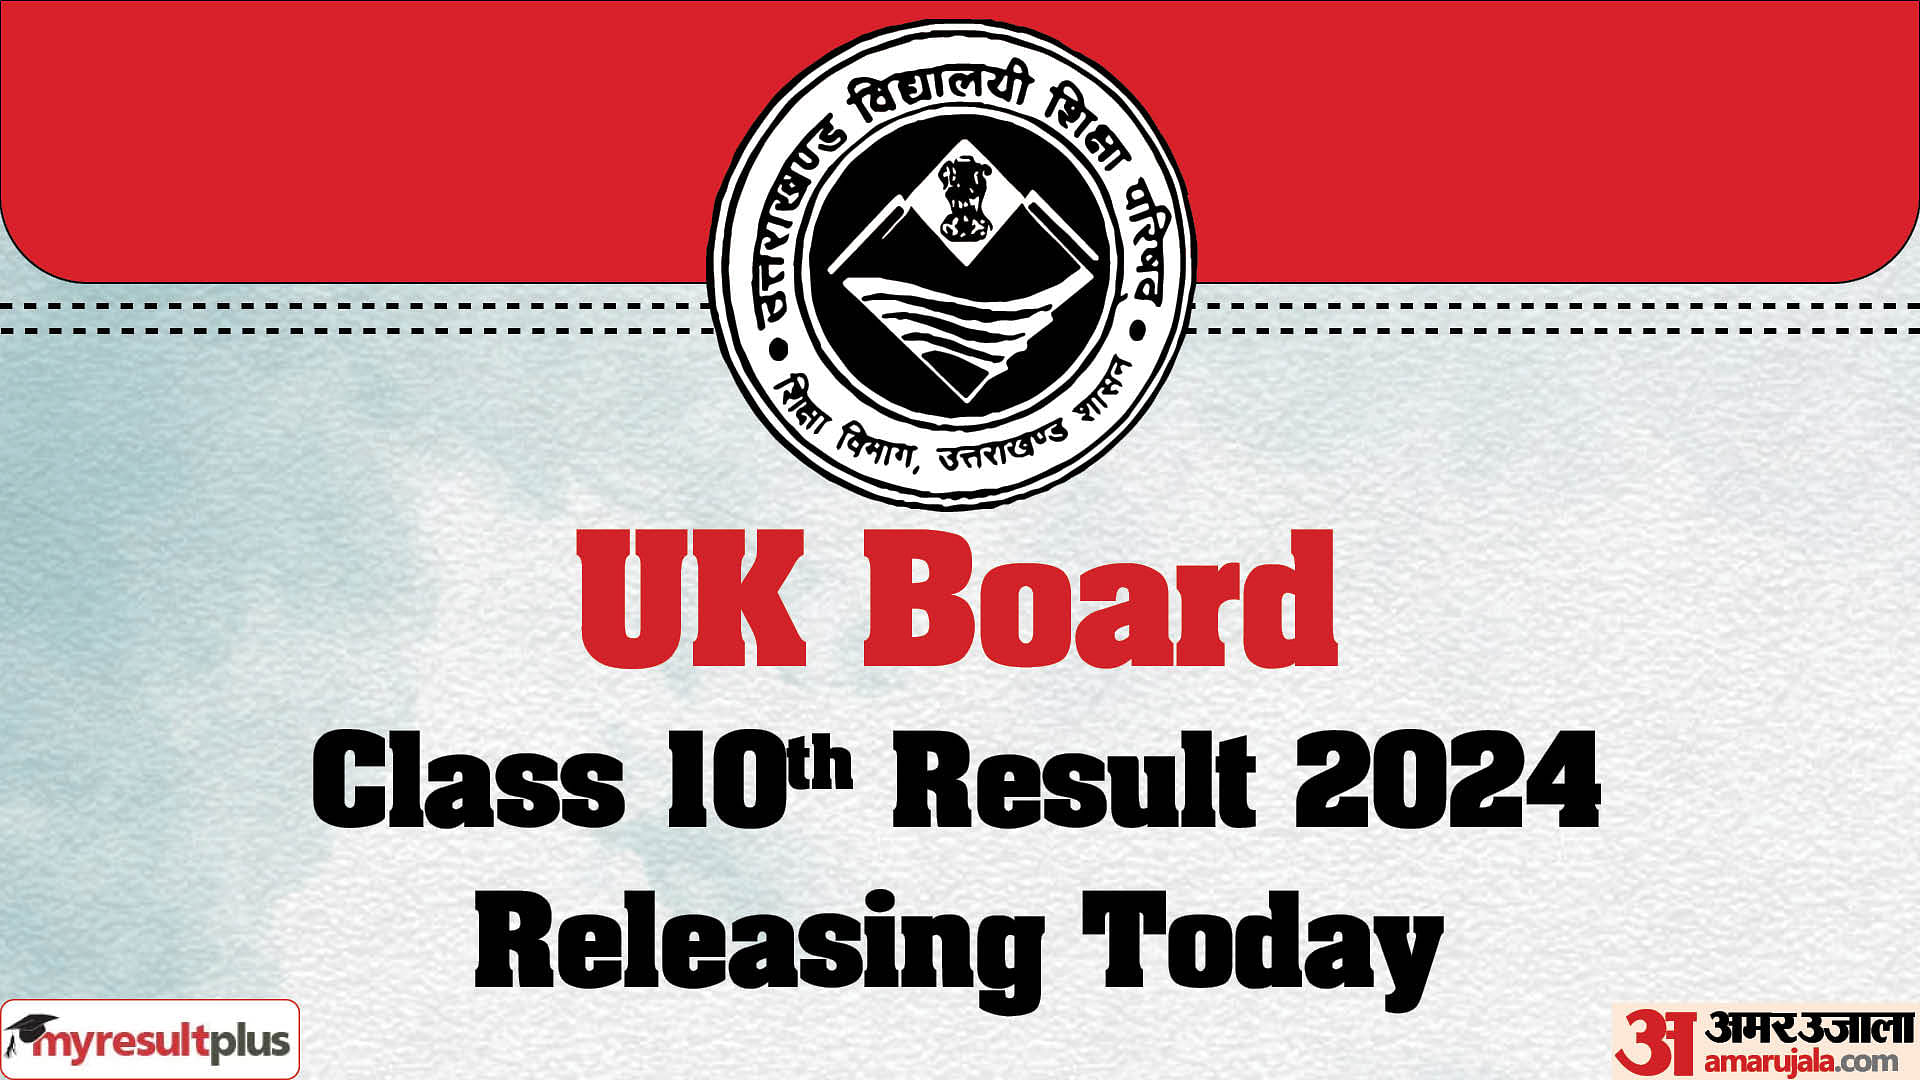 UBSE to declare the UK Board class 10th result 2024 today, Read more details here